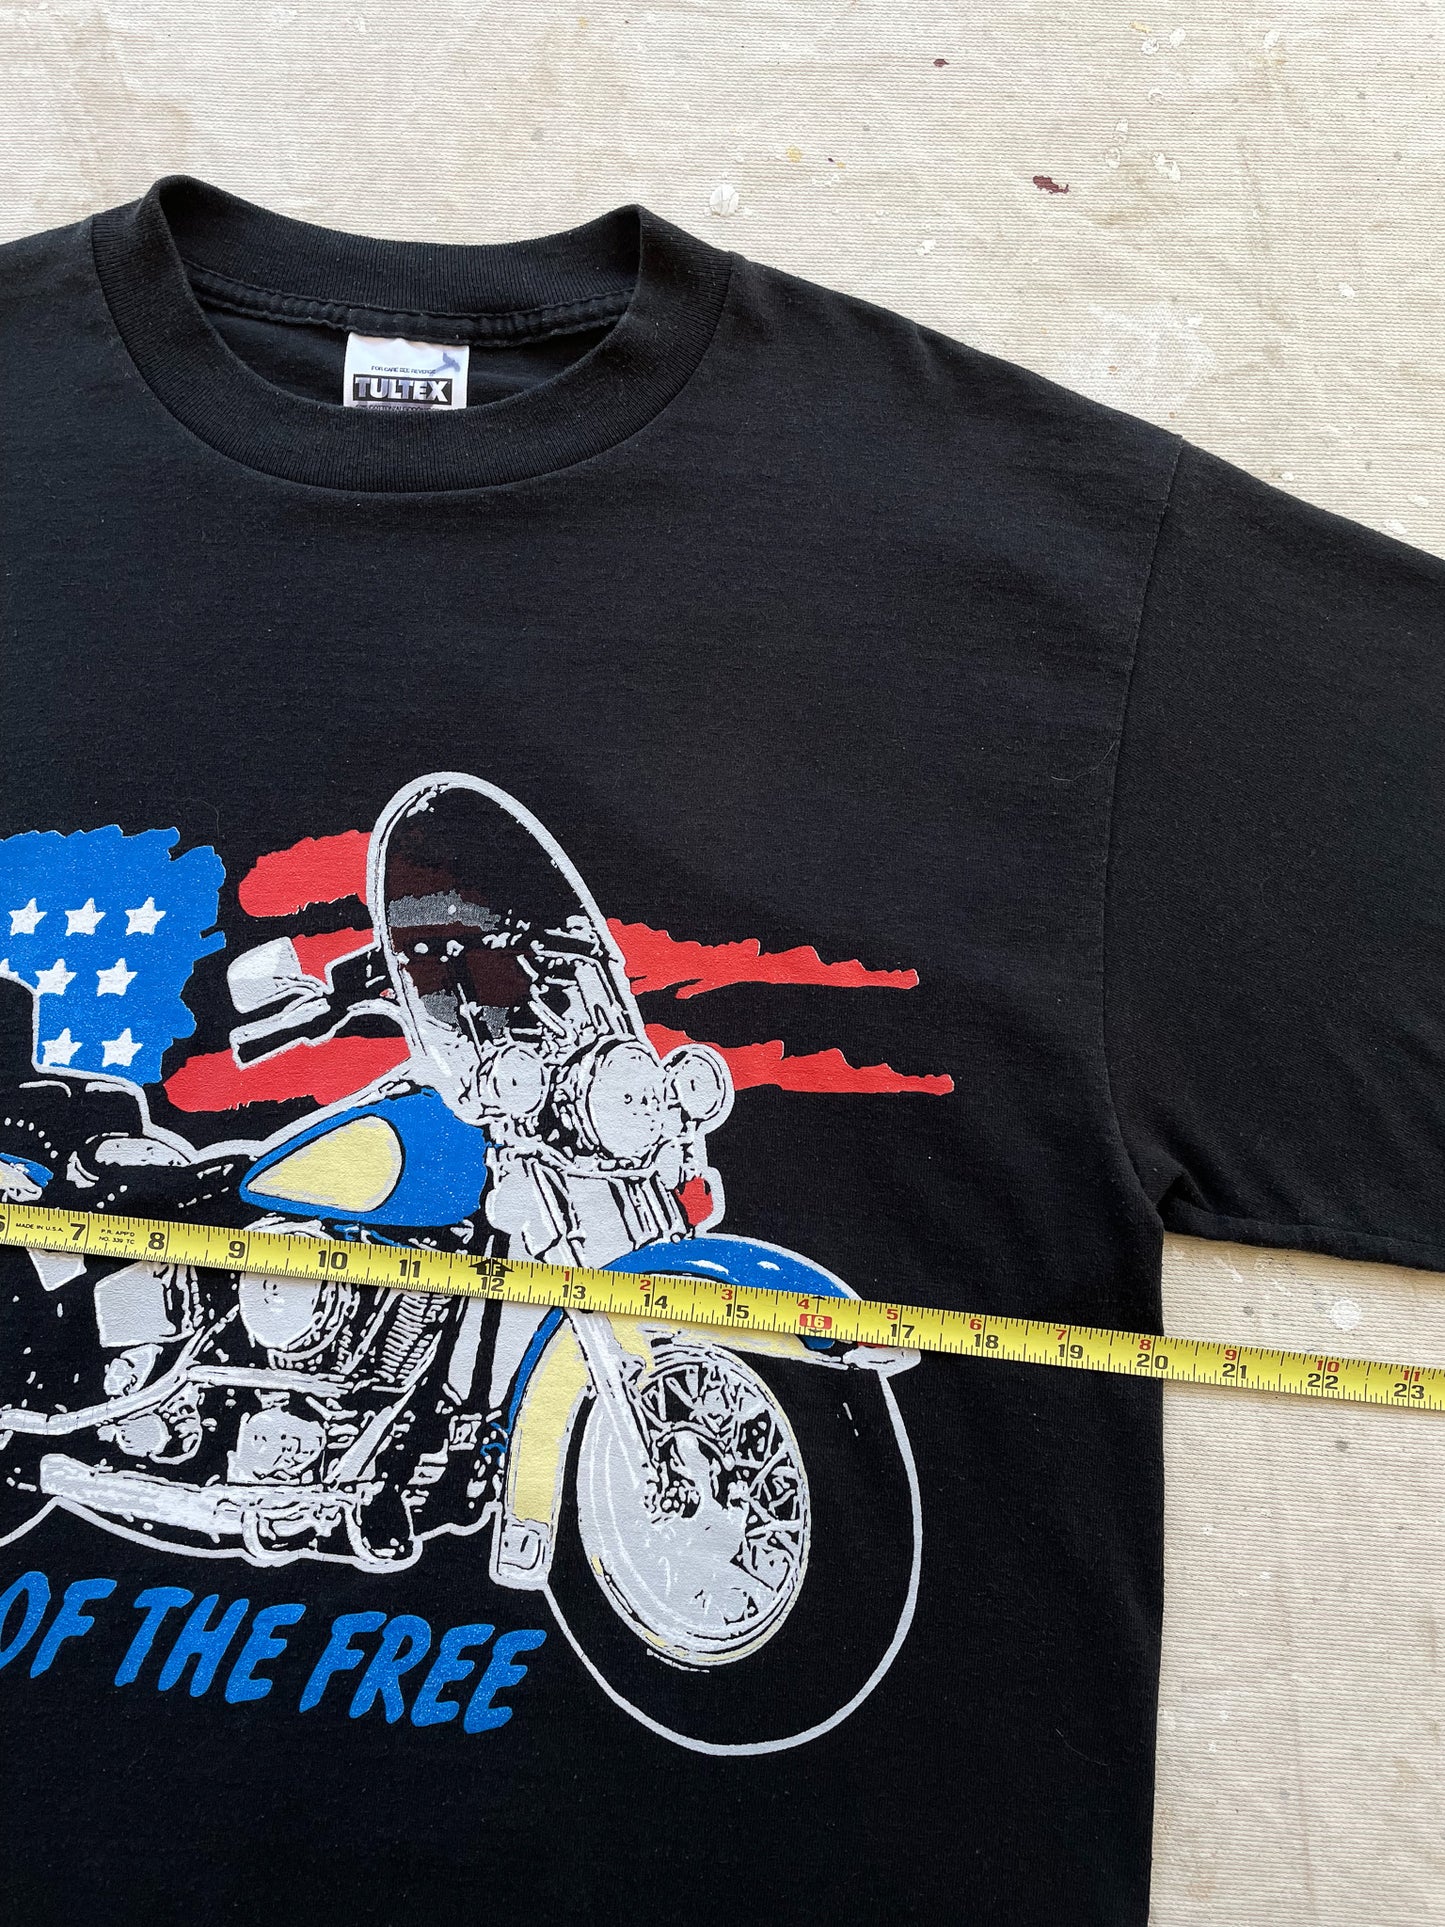 Land Of The Free Motorcycle T-Shirt—[L]